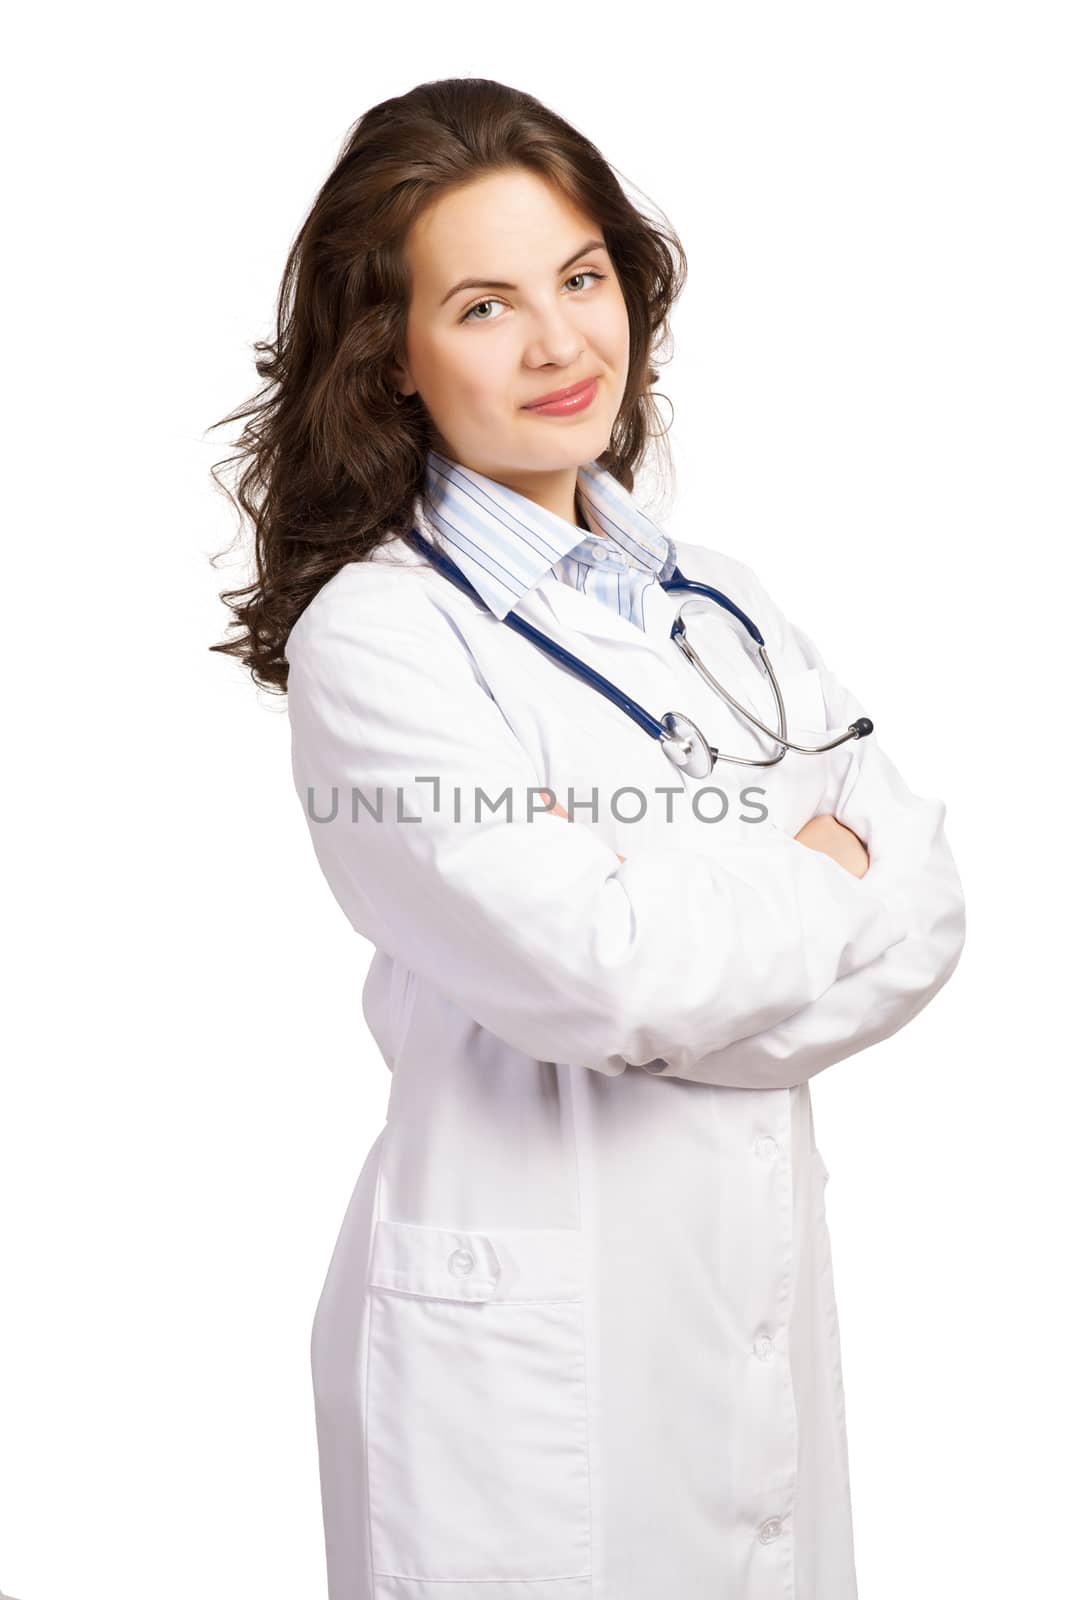 woman doctor, crossed her arms and smiles, isolated on white background